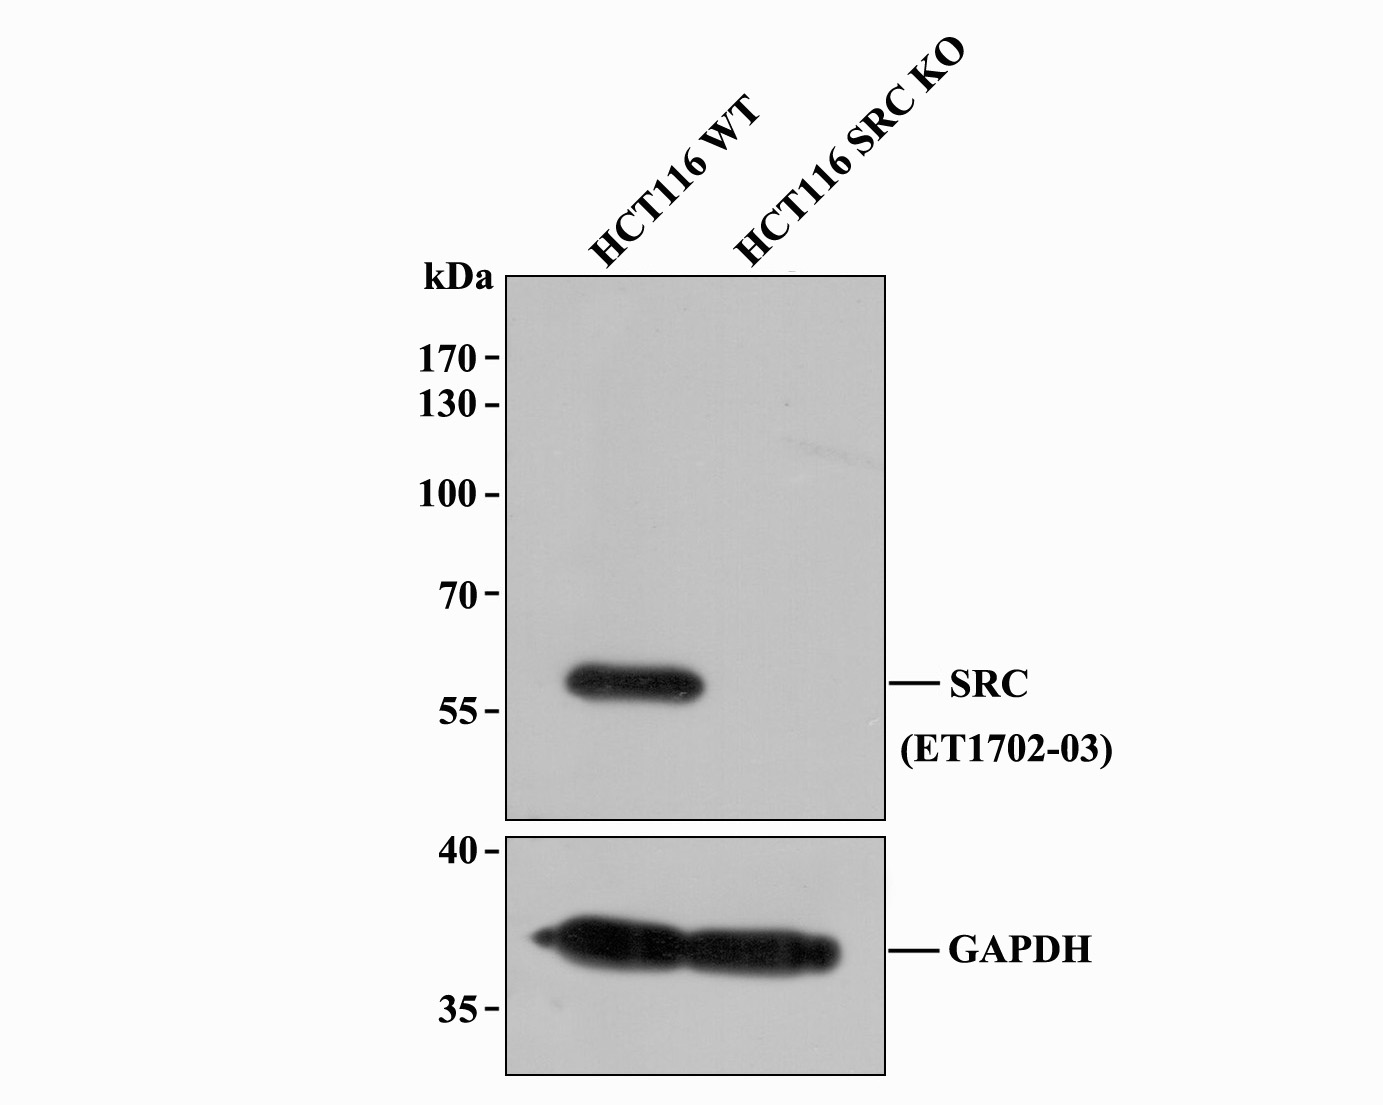 All lanes: Western blot analysis of Src with anti-Src antibody [JF0947] (ET1702-03) at 1:1,000 dilution.<br />
Lane 1: Wild-type HCT116 whole cell lysate (20 µg).<br />
Lane 2: Src knockout HCT116 whole cell lysate (20 µg).<br />
<br />
ET1702-03 was shown to specifically react with Src in wild-type HCT116 cells. No band was observed when Src knockout sample was tested. Wild-type and Src knockout samples were subjected to SDS-PAGE. Proteins were transferred to a PVDF membrane and blocked with 5% NFDM in TBST for 1 hour at room temperature. The primary antibody (ET1702-03, 1/1,000) and Loading control antibody (Rabbit anti-GAPDH , ET1601-4, 1/10,000) was used in 5% BSA at room temperature for 2 hours. Goat Anti-Rabbit IgG-HRP Secondary Antibody (HA1001) at 1:200,000 dilution was used for 1 hour at room temperature.